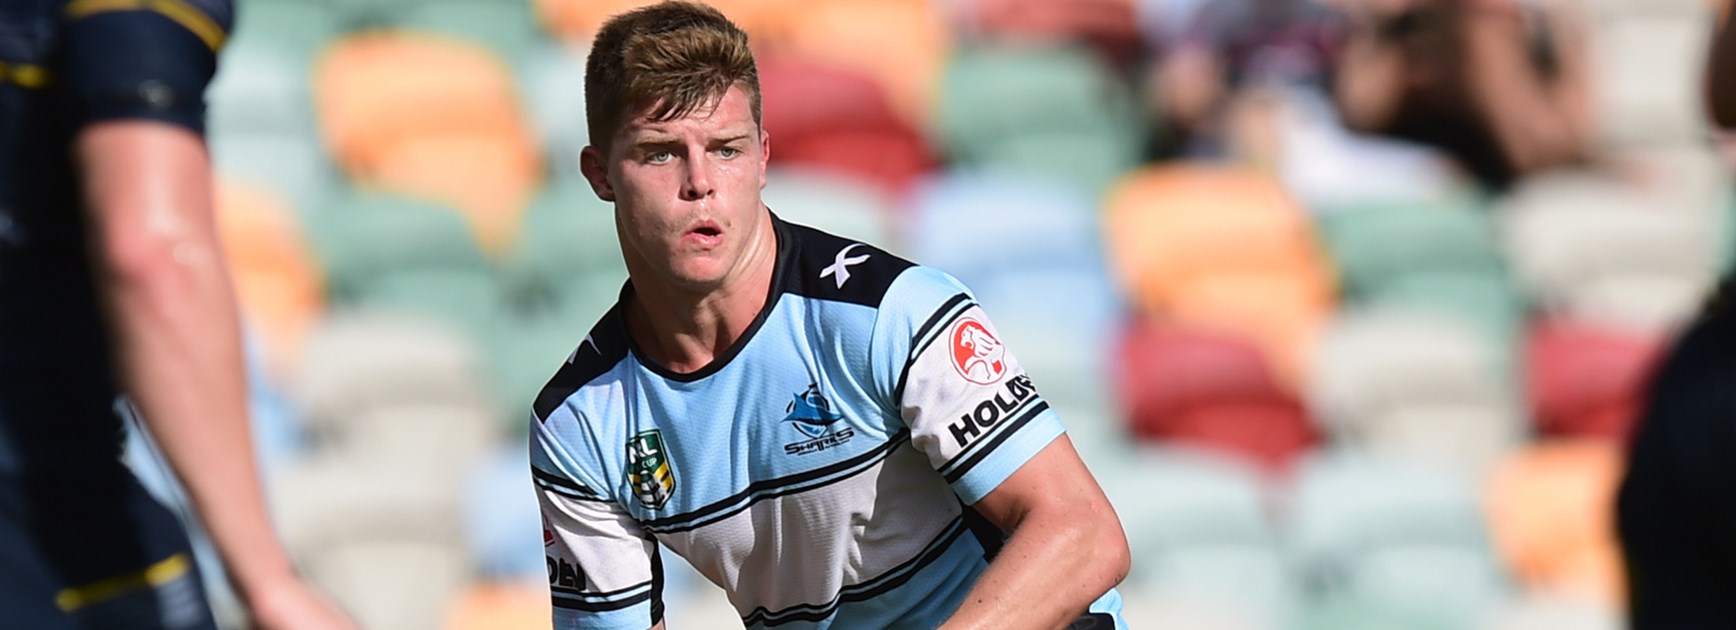 Sharks NYC dummy-half Jayden Brailey looks likely to move into the NRL side in the coming years.